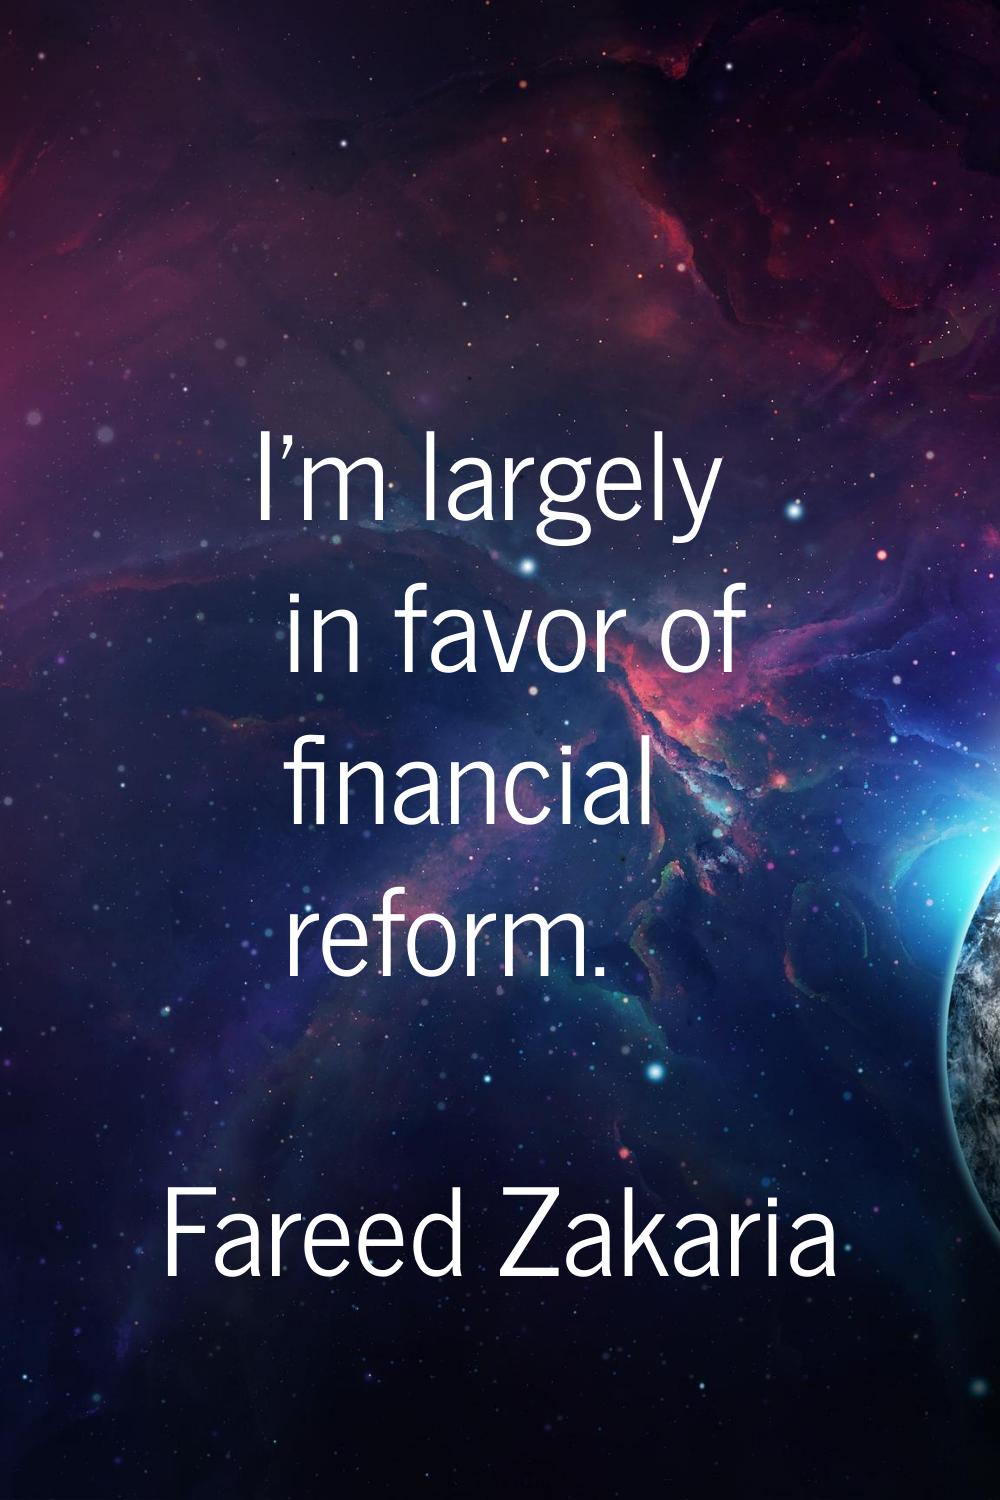 I'm largely in favor of financial reform.